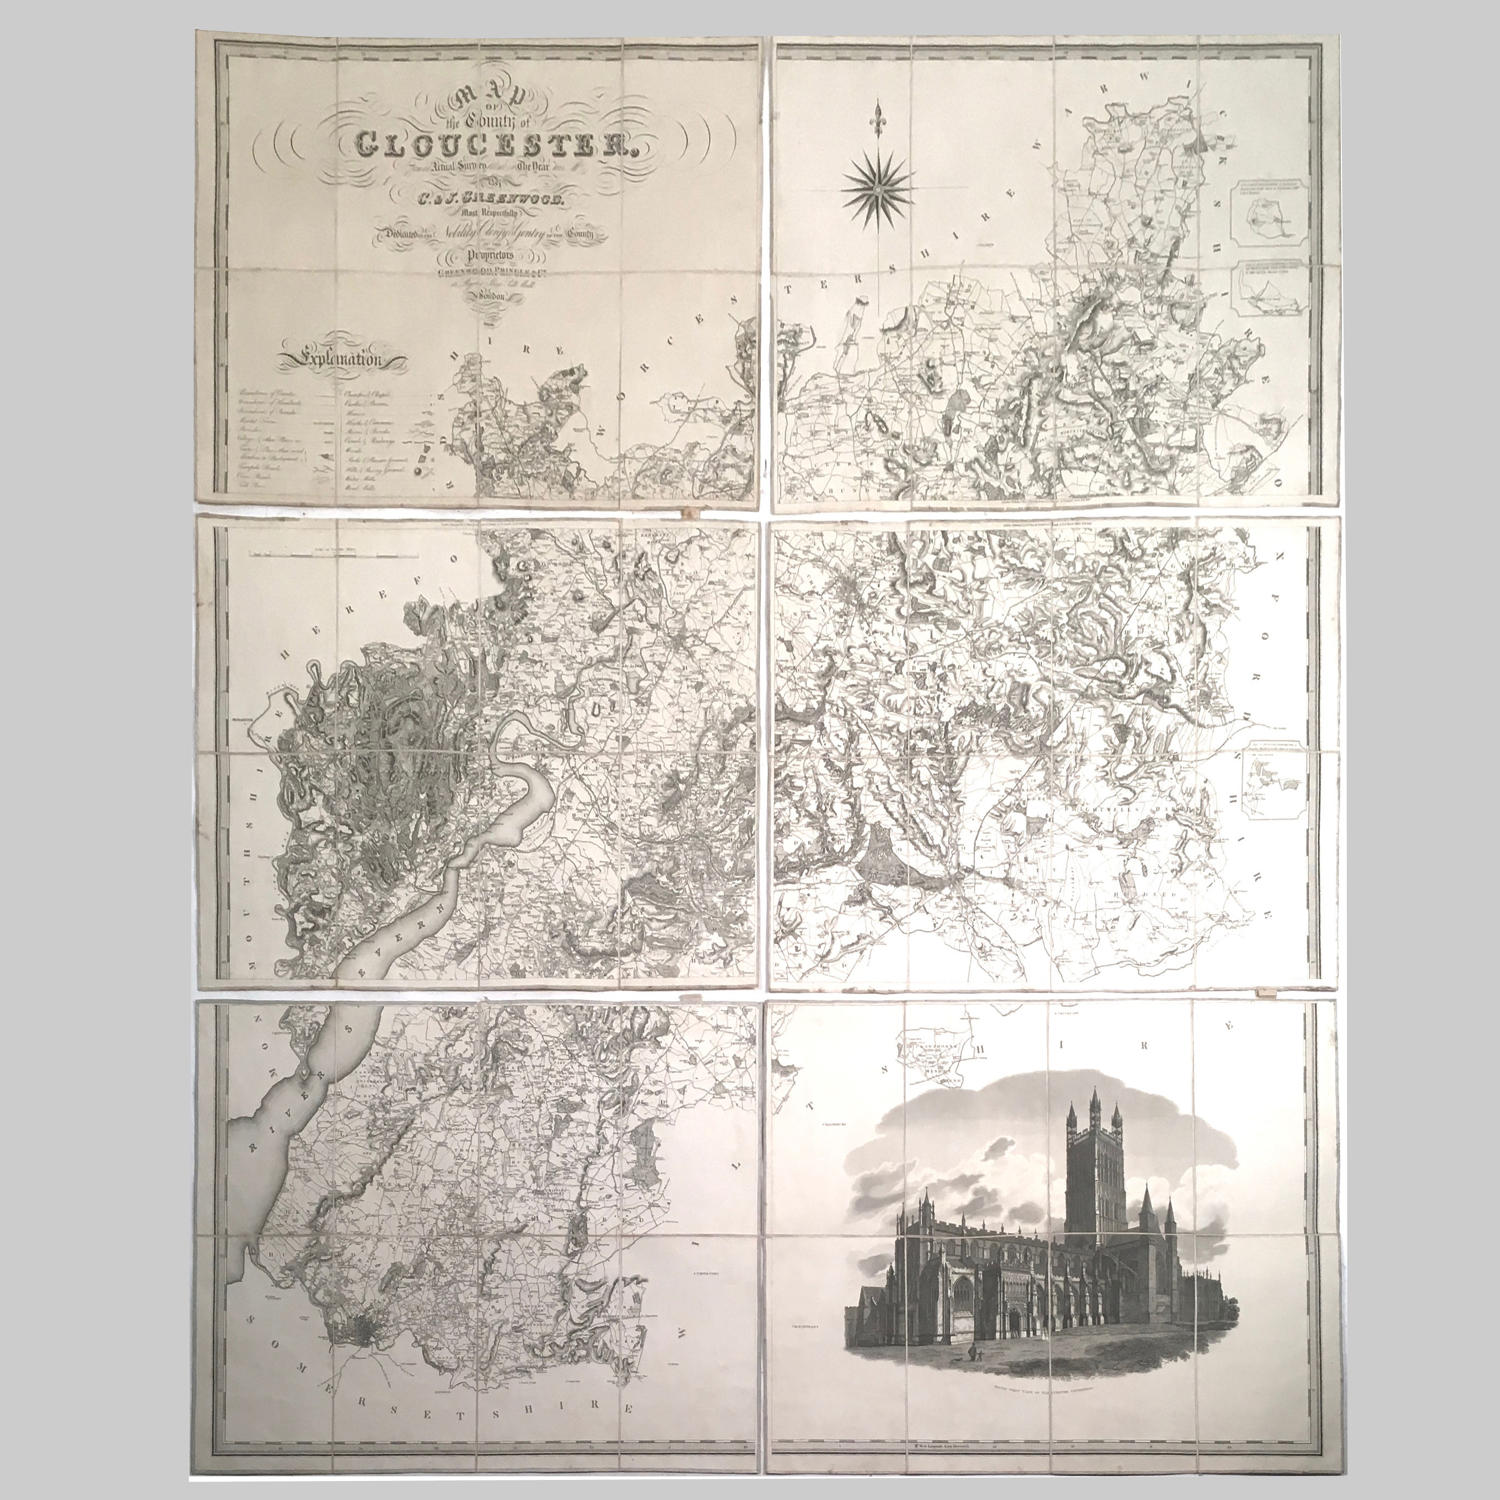 Cased Map of Gloucestershire by Greenwood Pringle & Co. 1824